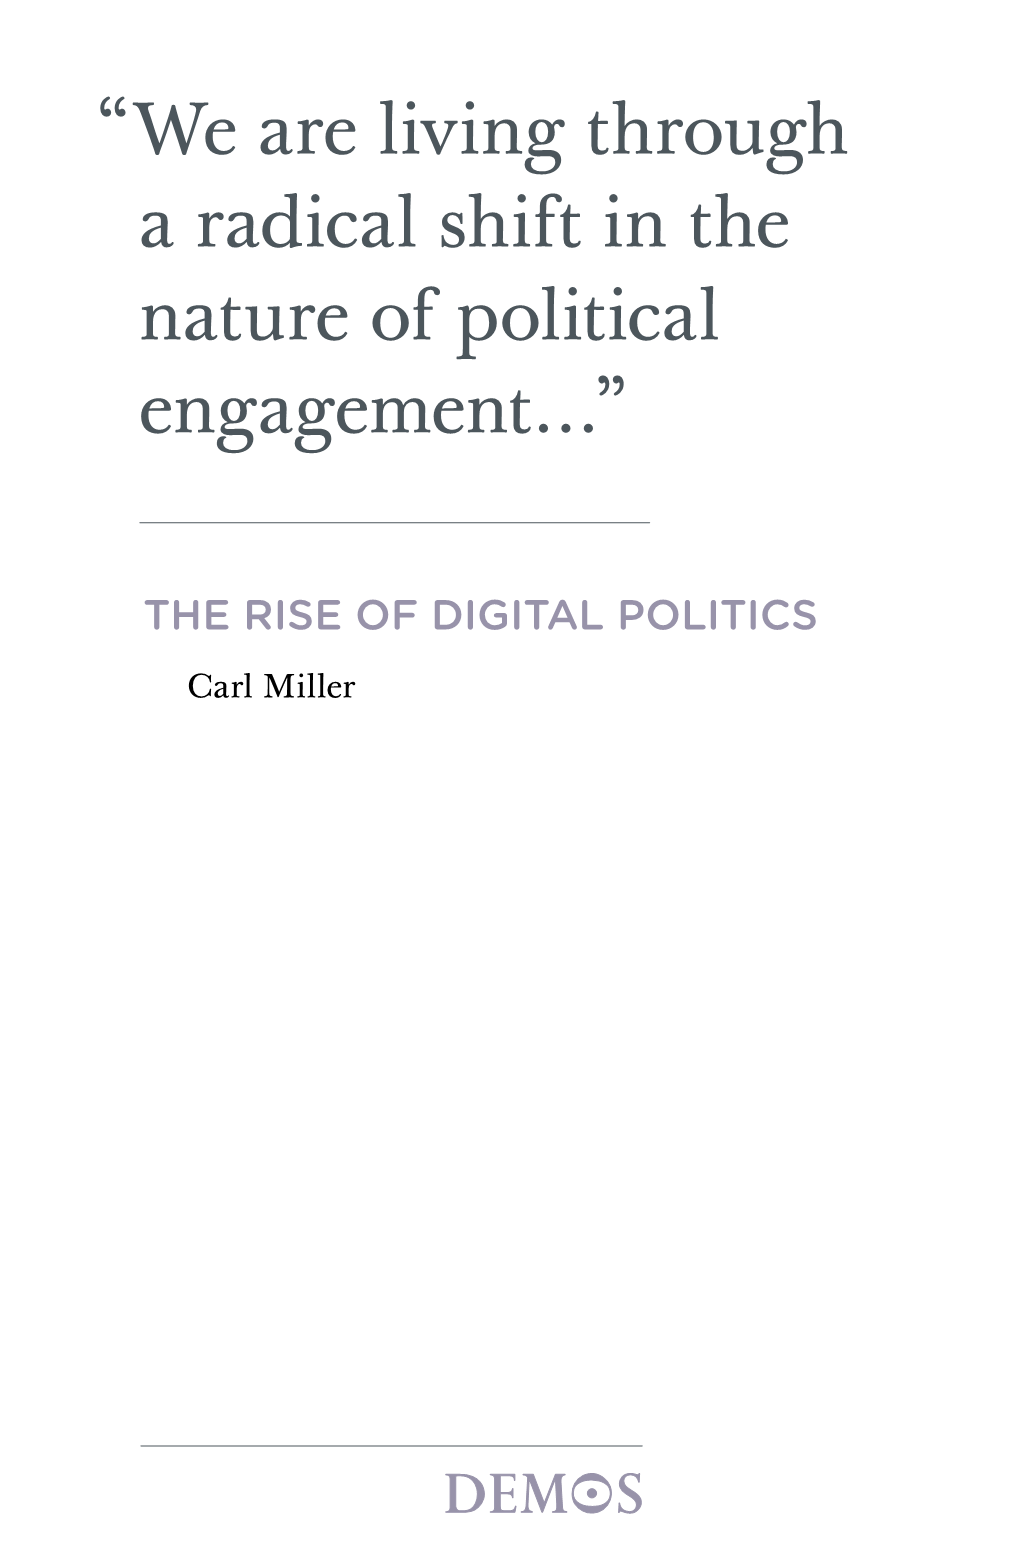 We Are Living Through a Radical Shift in the Nature of Political Engagement…”